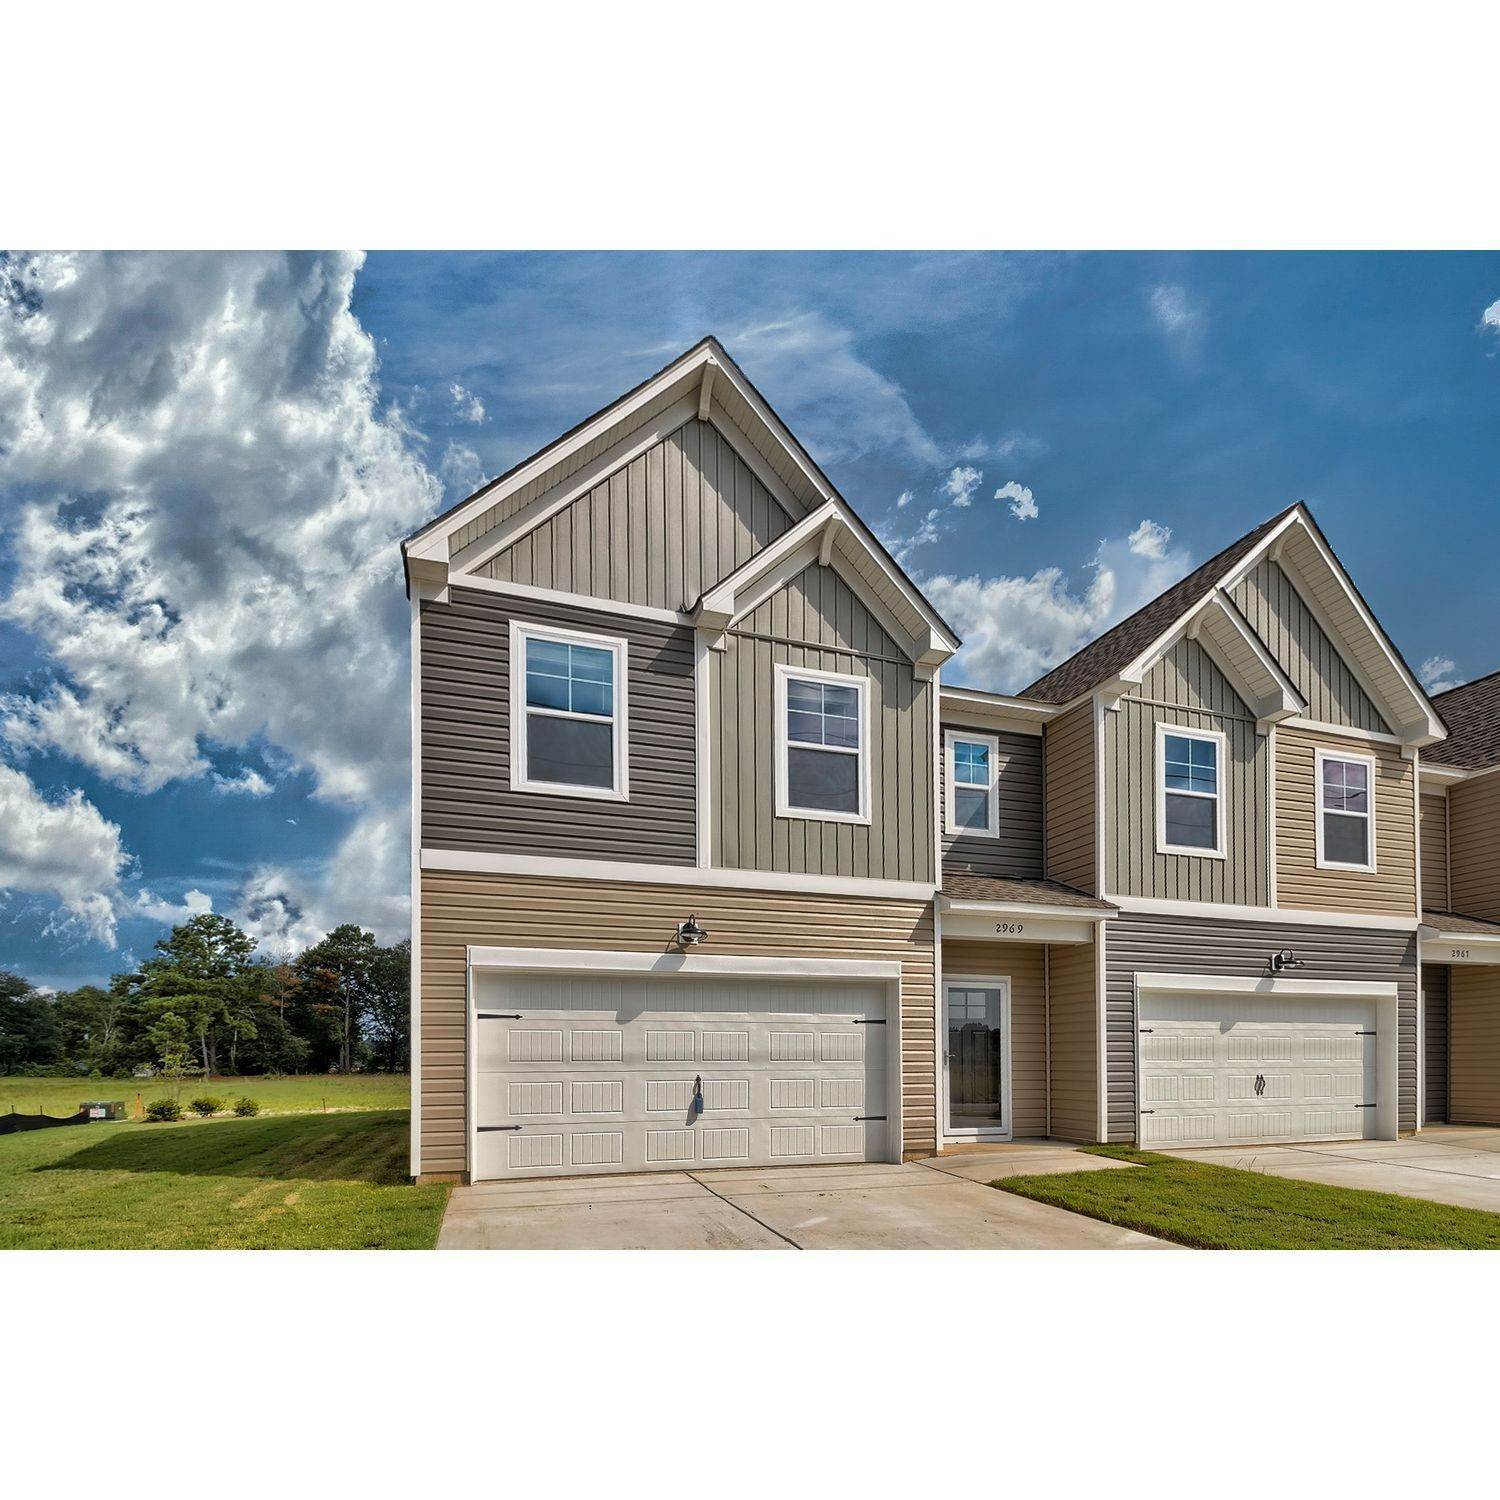 Townhomes at Hunter's Crossing bâtiment à 1910 Flagpole Drive, Sumter, SC 29150